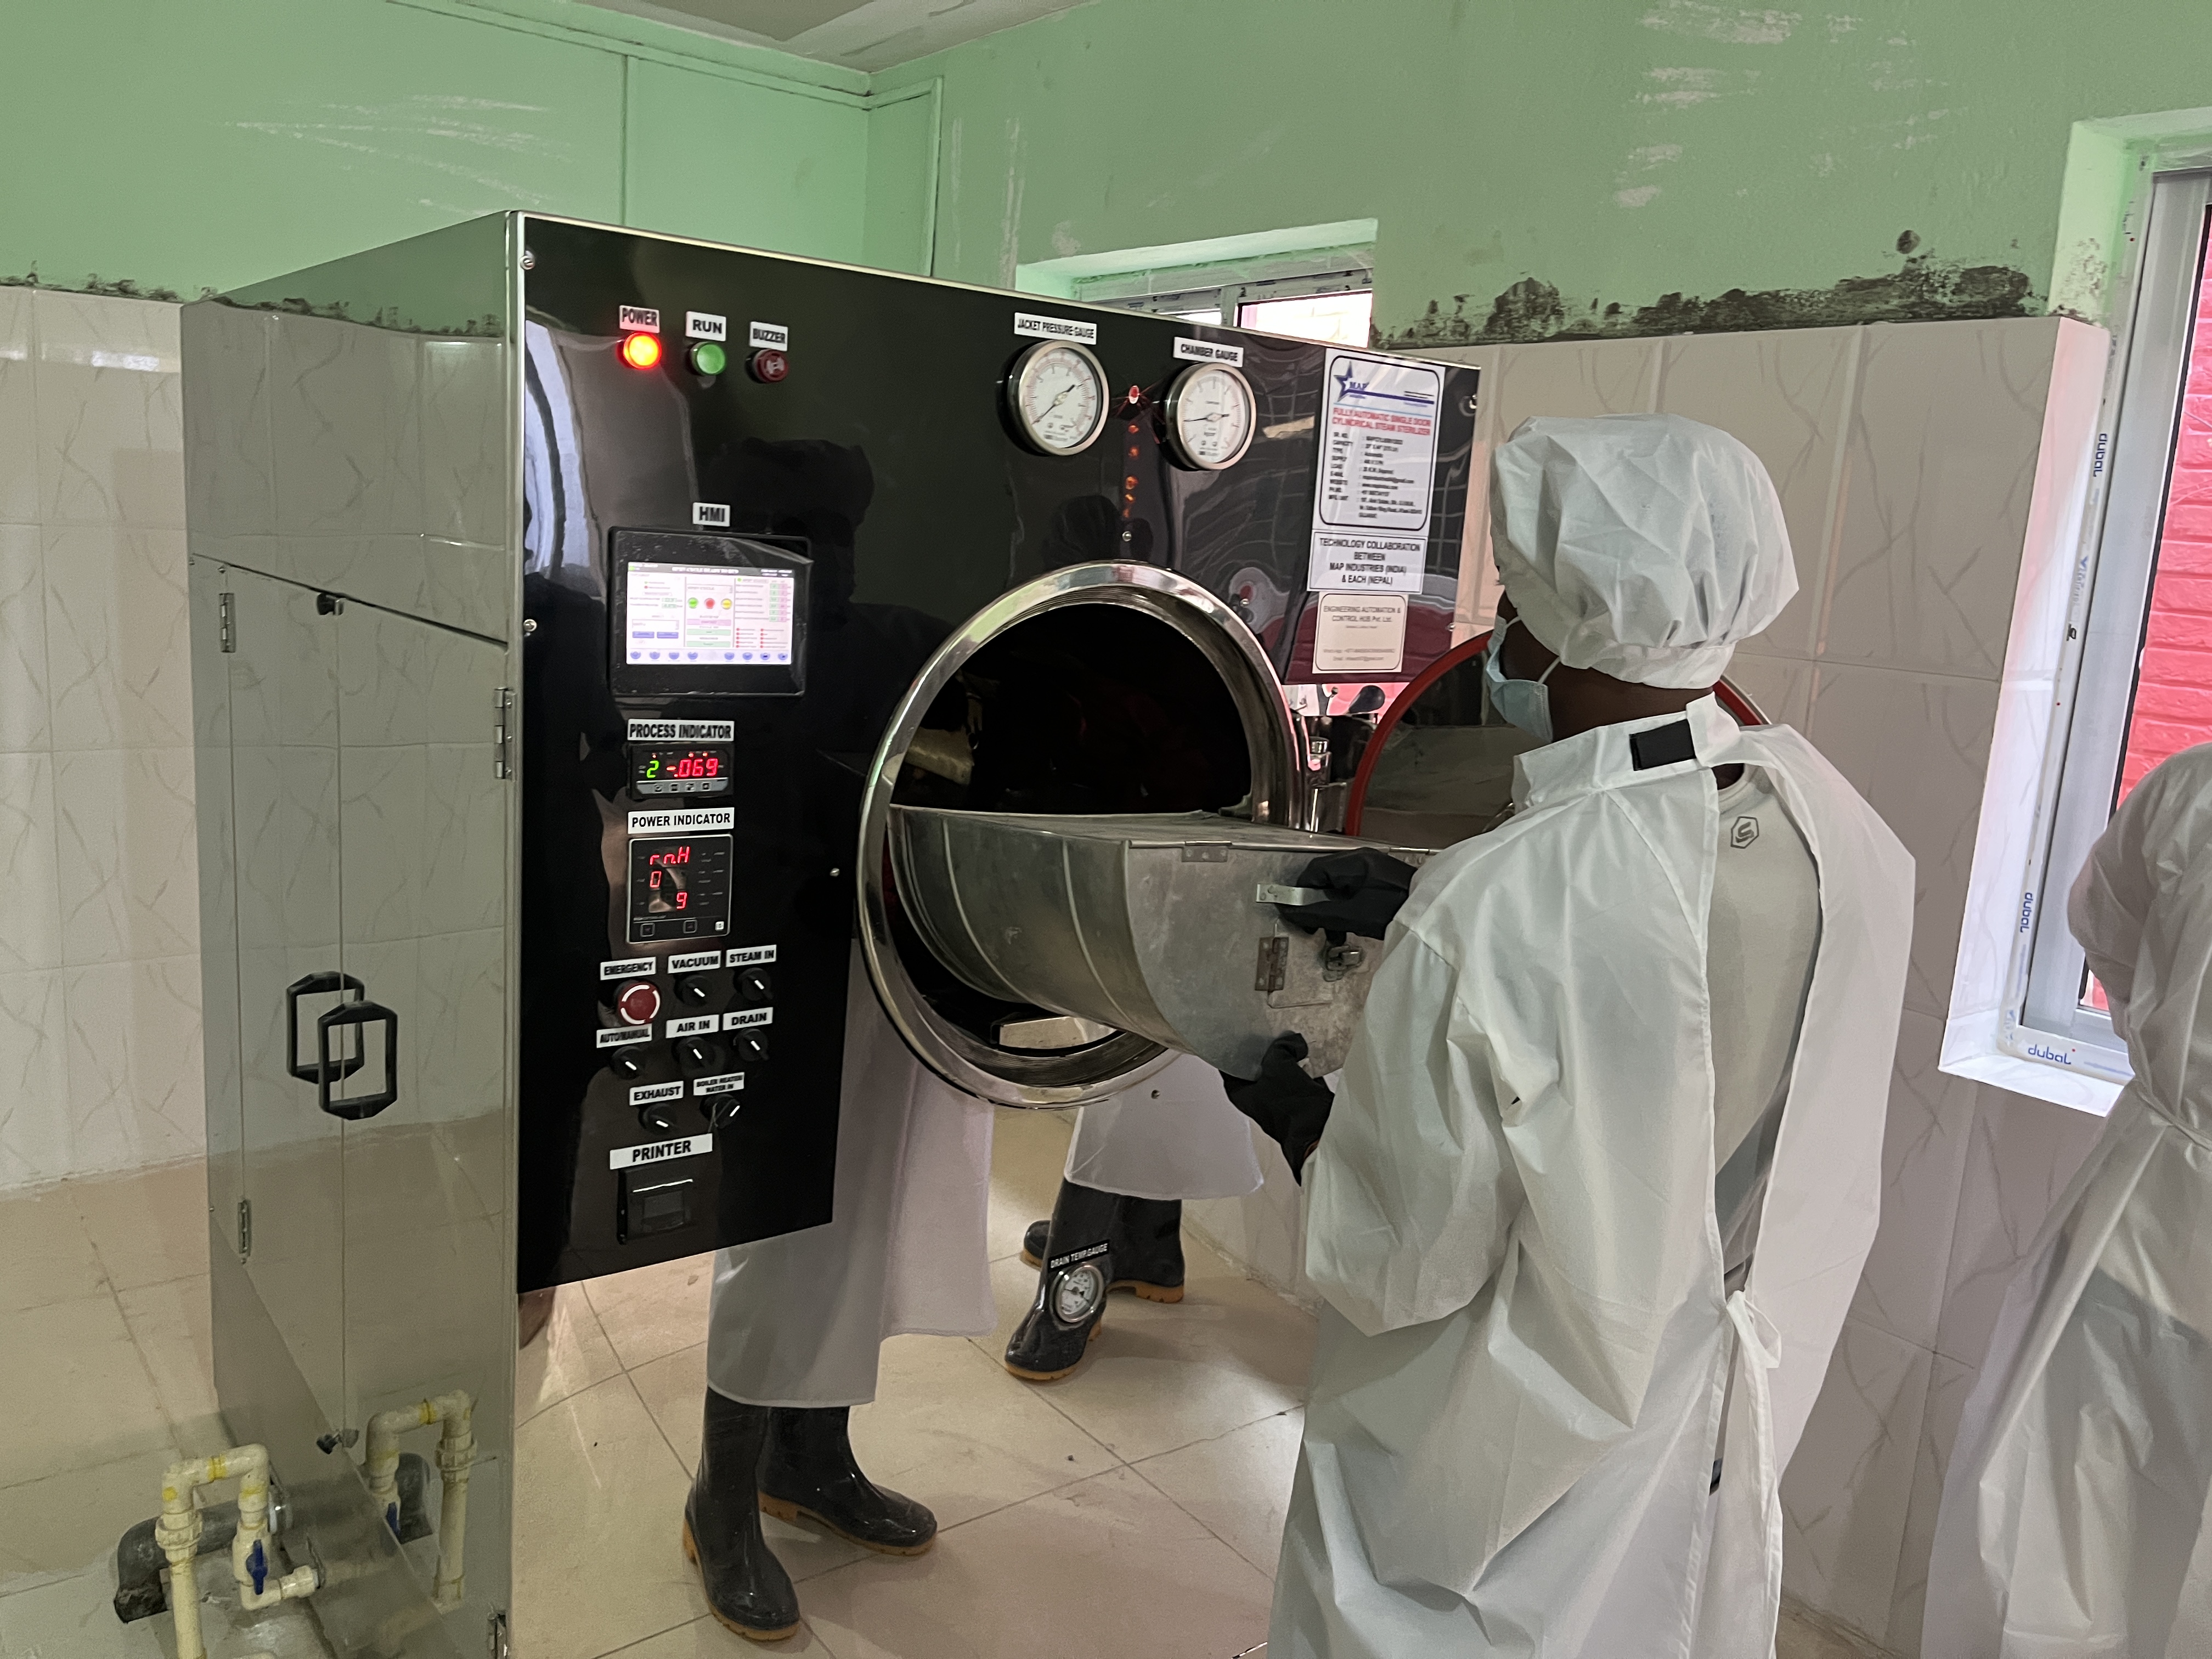 Smart autoclave for disinfection of infectious waste